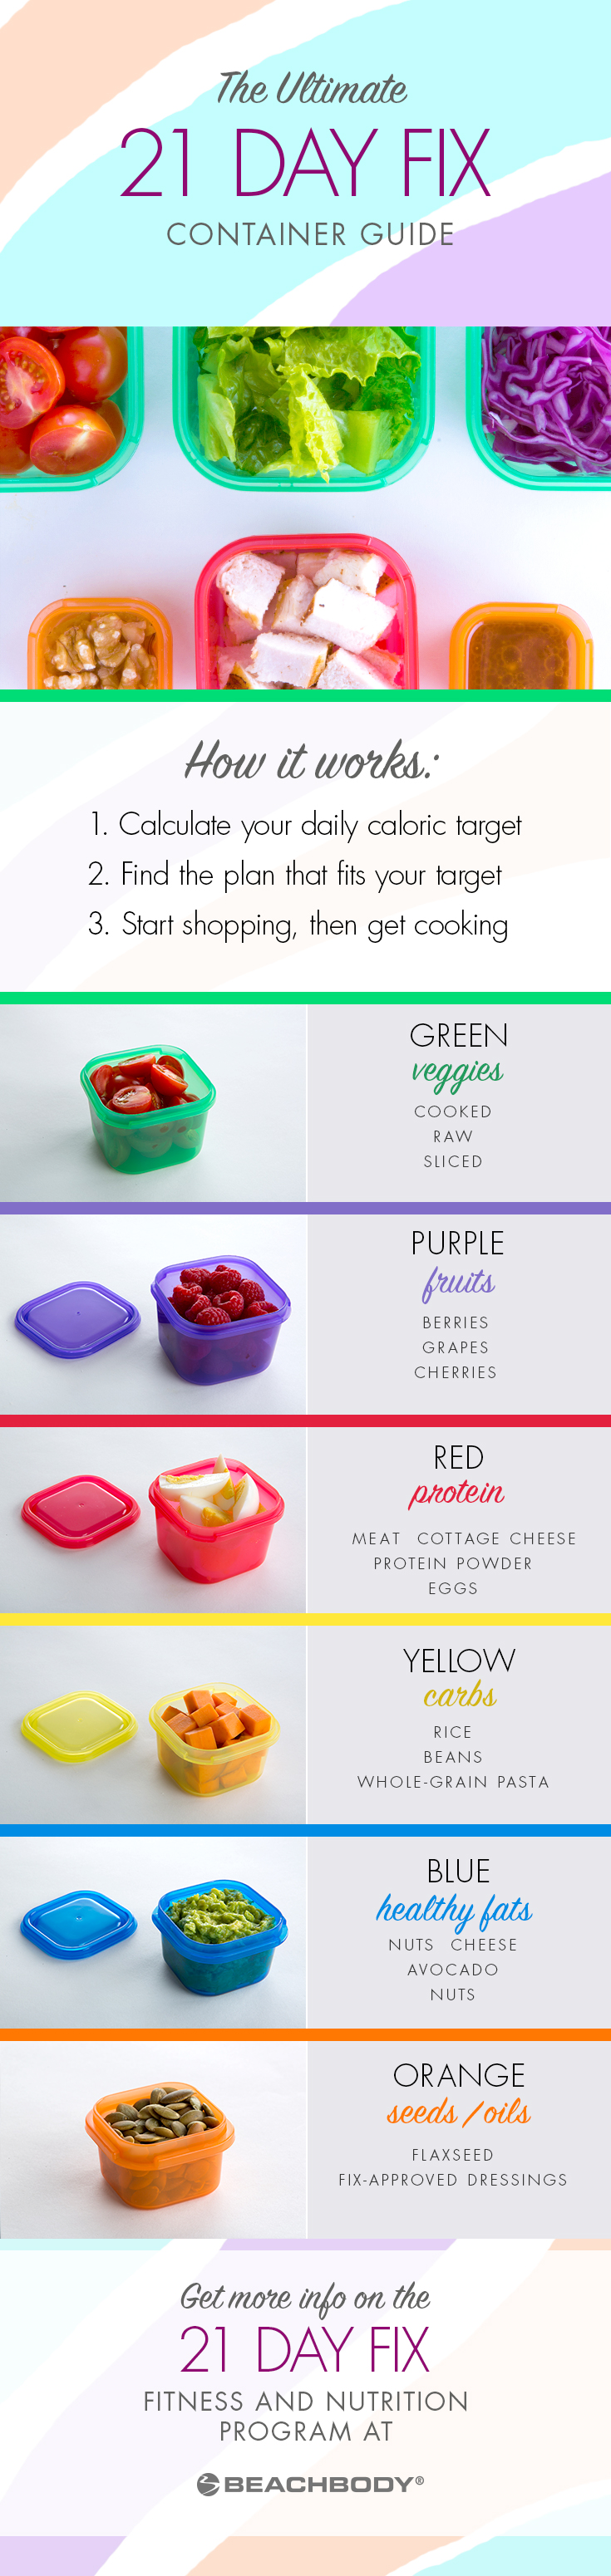 Free 21 Day Fix Containers Calculator & Sizes